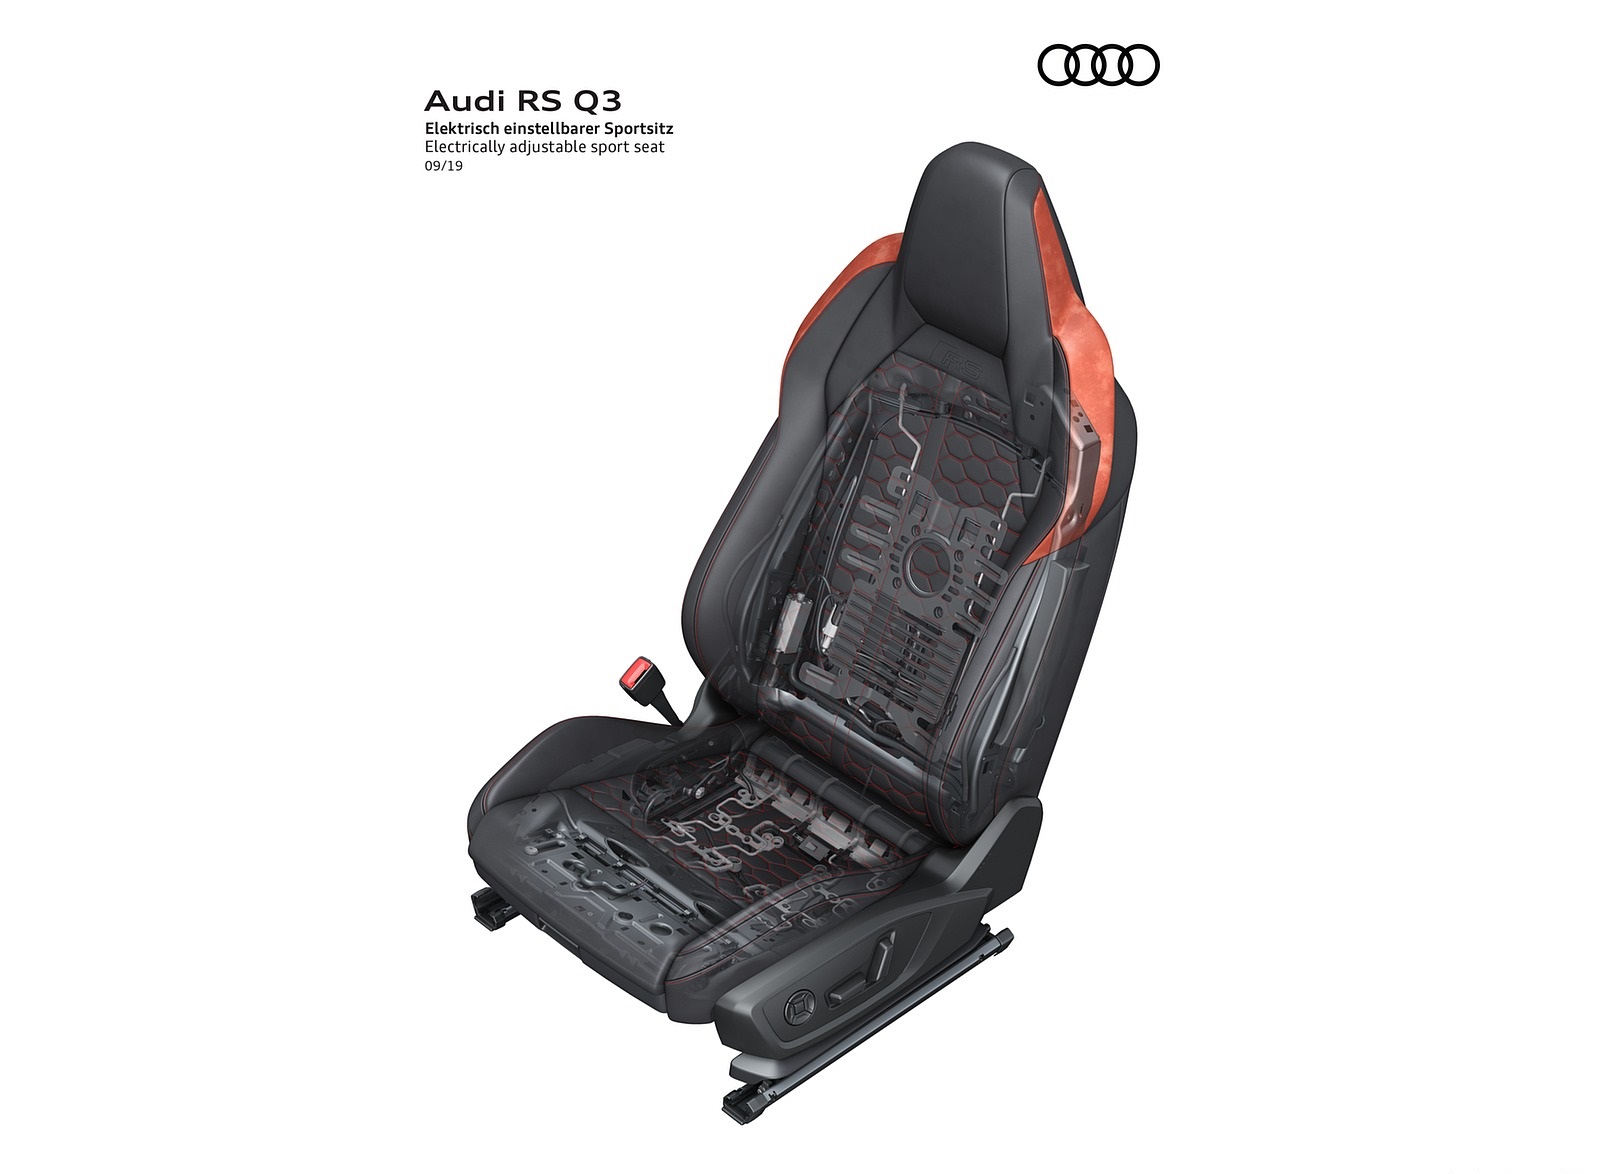 2020 Audi RS Q3 Electrically adjustable sport seat- Wallpapers #104 of 116